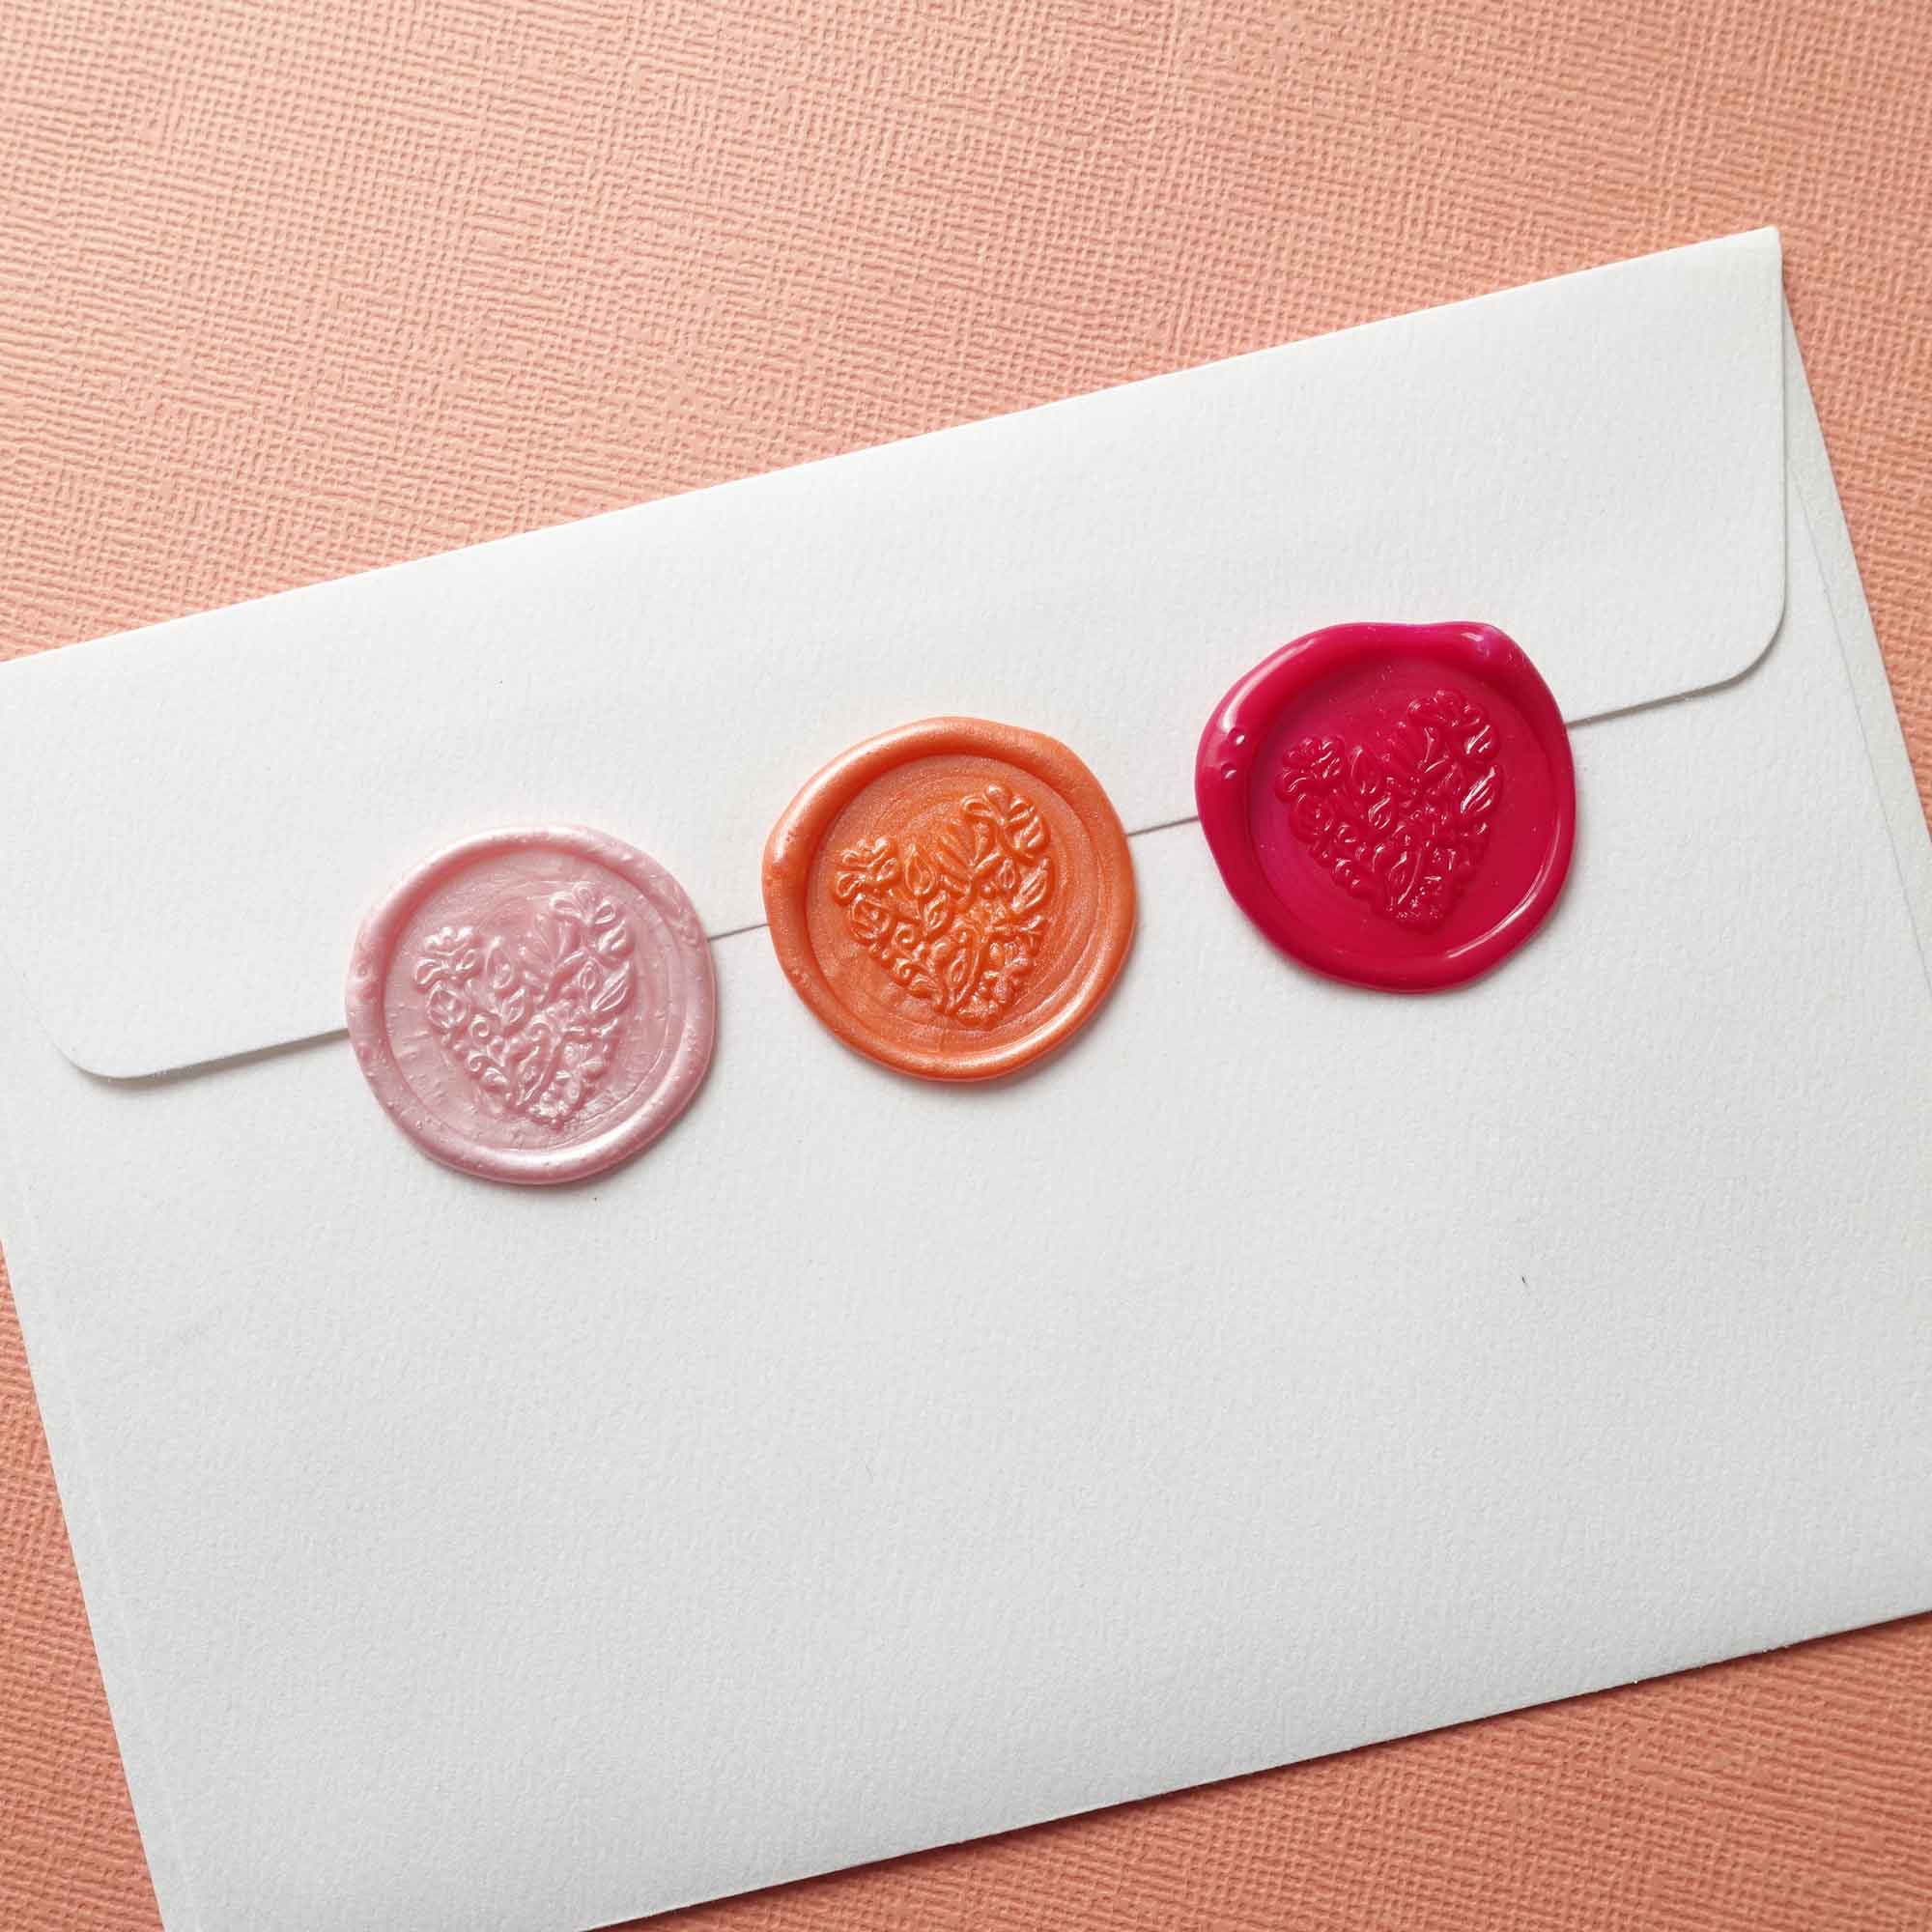 Entwined Heart Wax Stamp Make Wax Seals With Hearts Wax Stamp for Wax  Seals, Invitation Seals and Envelope Seals 2 Hearts 